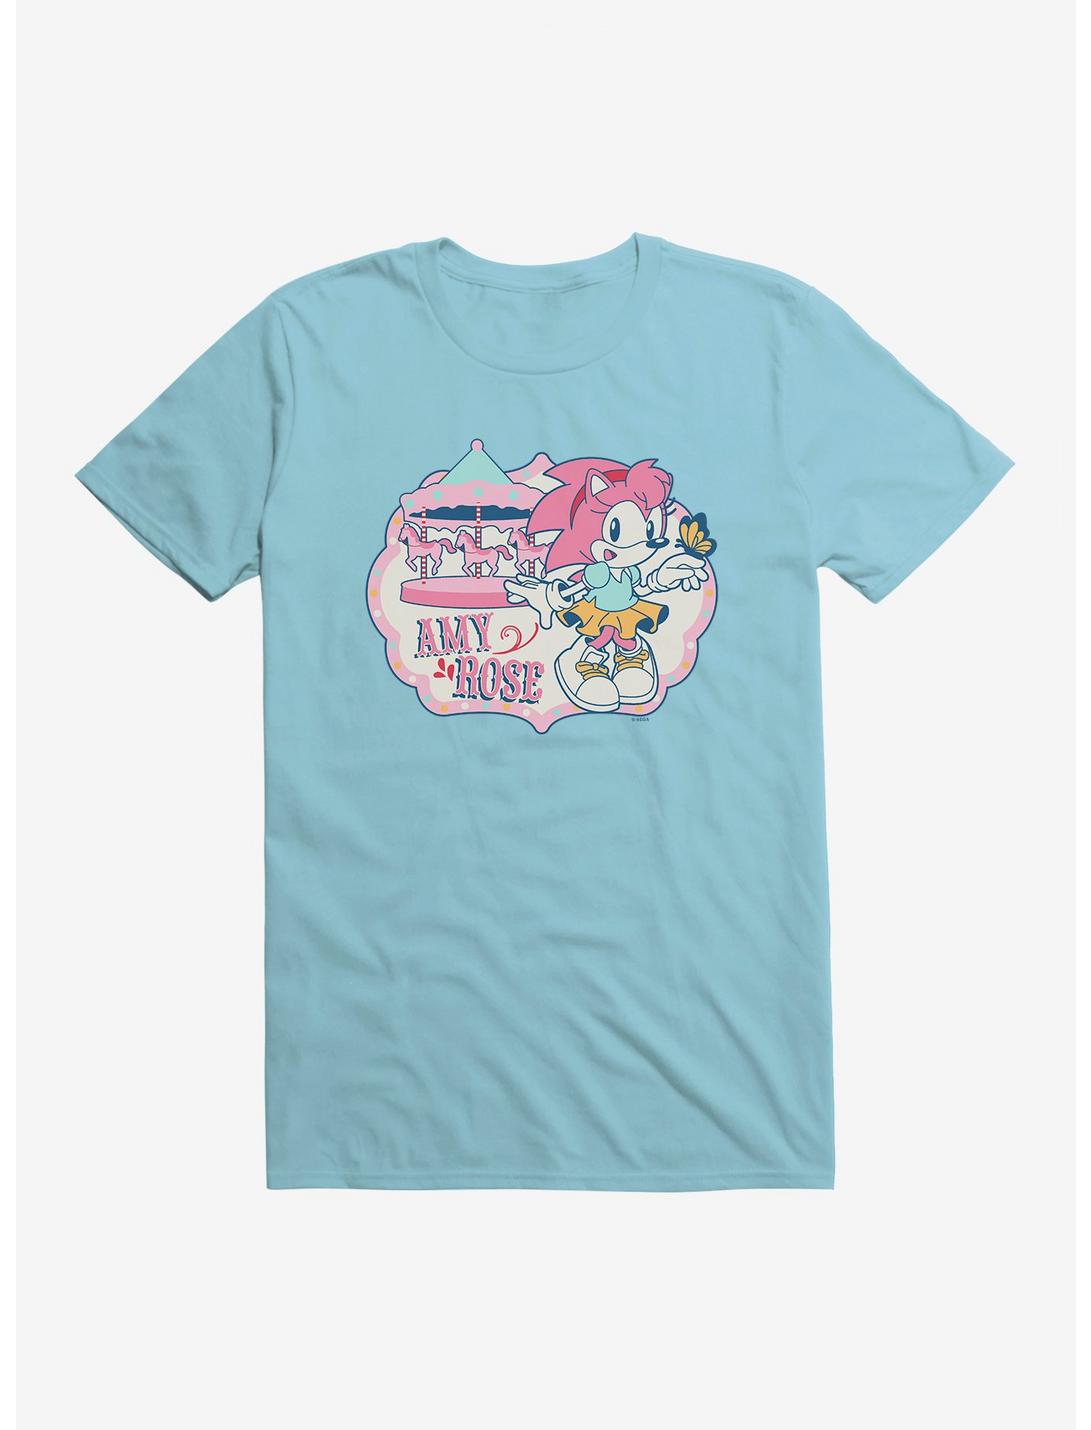 Sonic The Hedgehog Amy Rose T-Shirt, TURQUOISE, hi-res